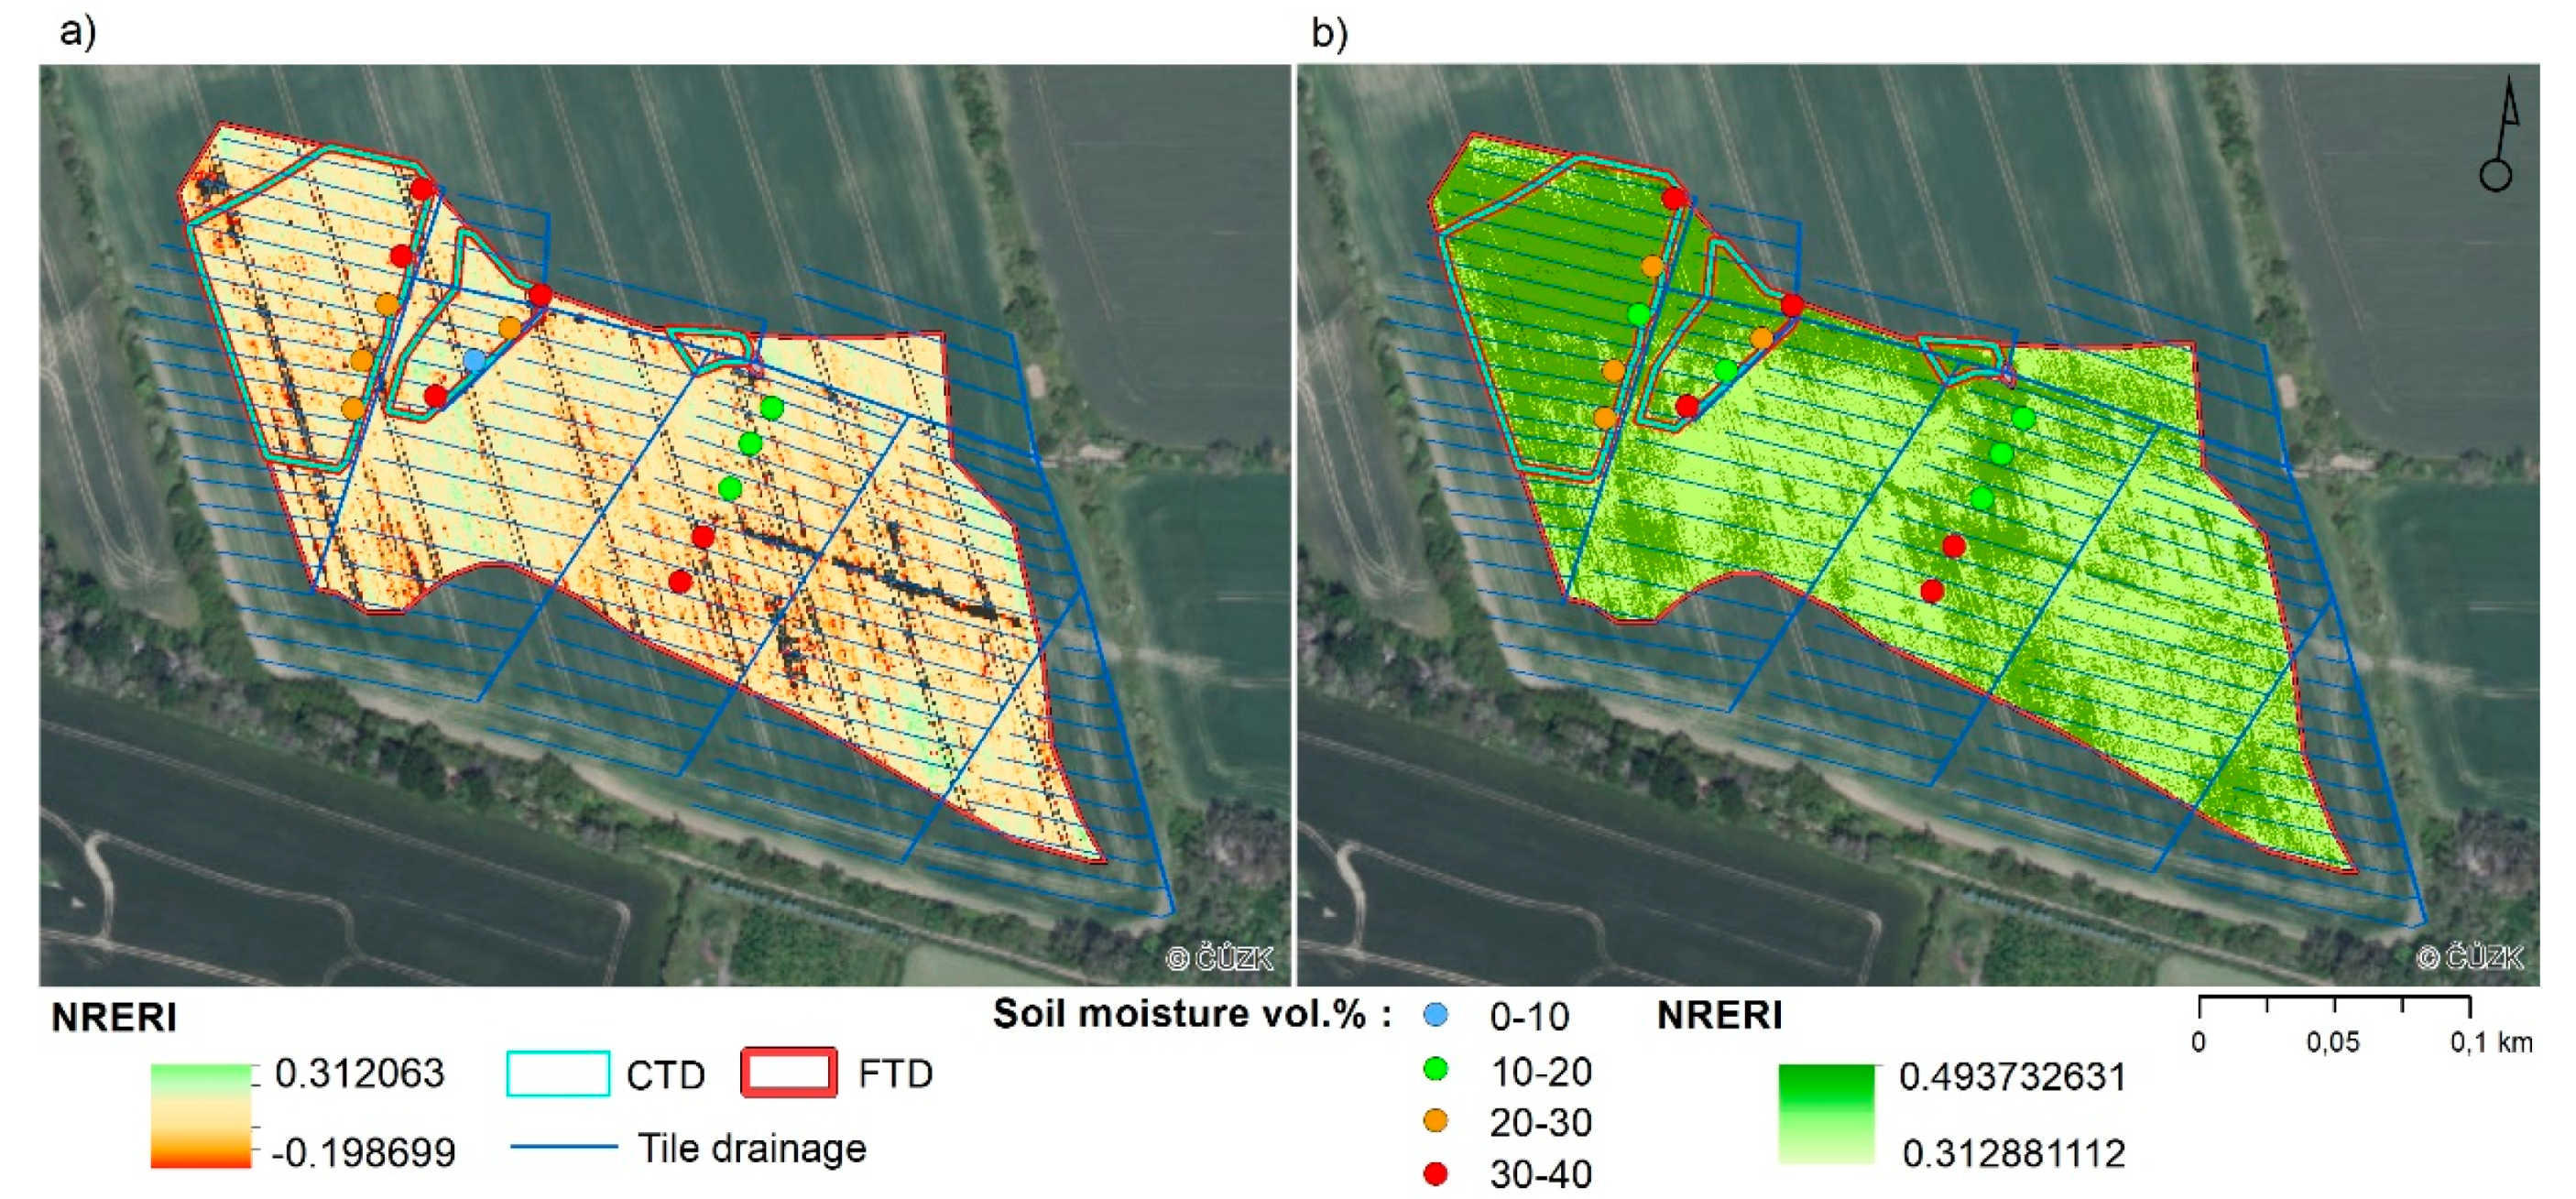 Remote Sensing | Free Full-Text | The Effect of Controlled Tile Drainage on  Growth and Grain Yield of Spring Barley as Detected by UAV Images, Yield  Map and Soil Moisture Content